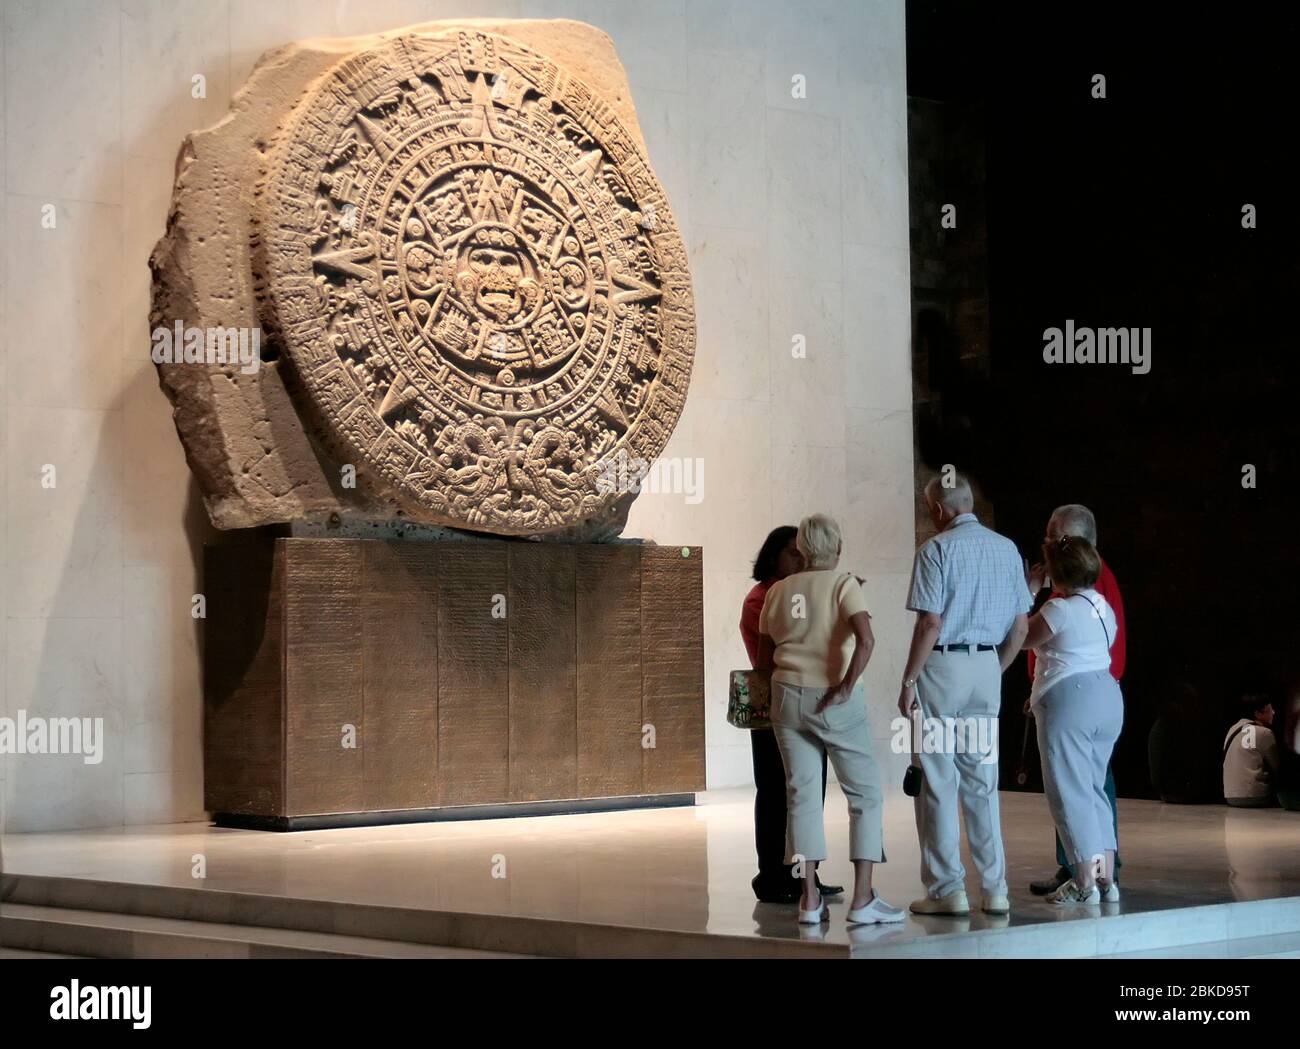 People looking at Aztec Sun Stone Calendar in Anthropology Museum, Mexico City, Mexico Stock Photo